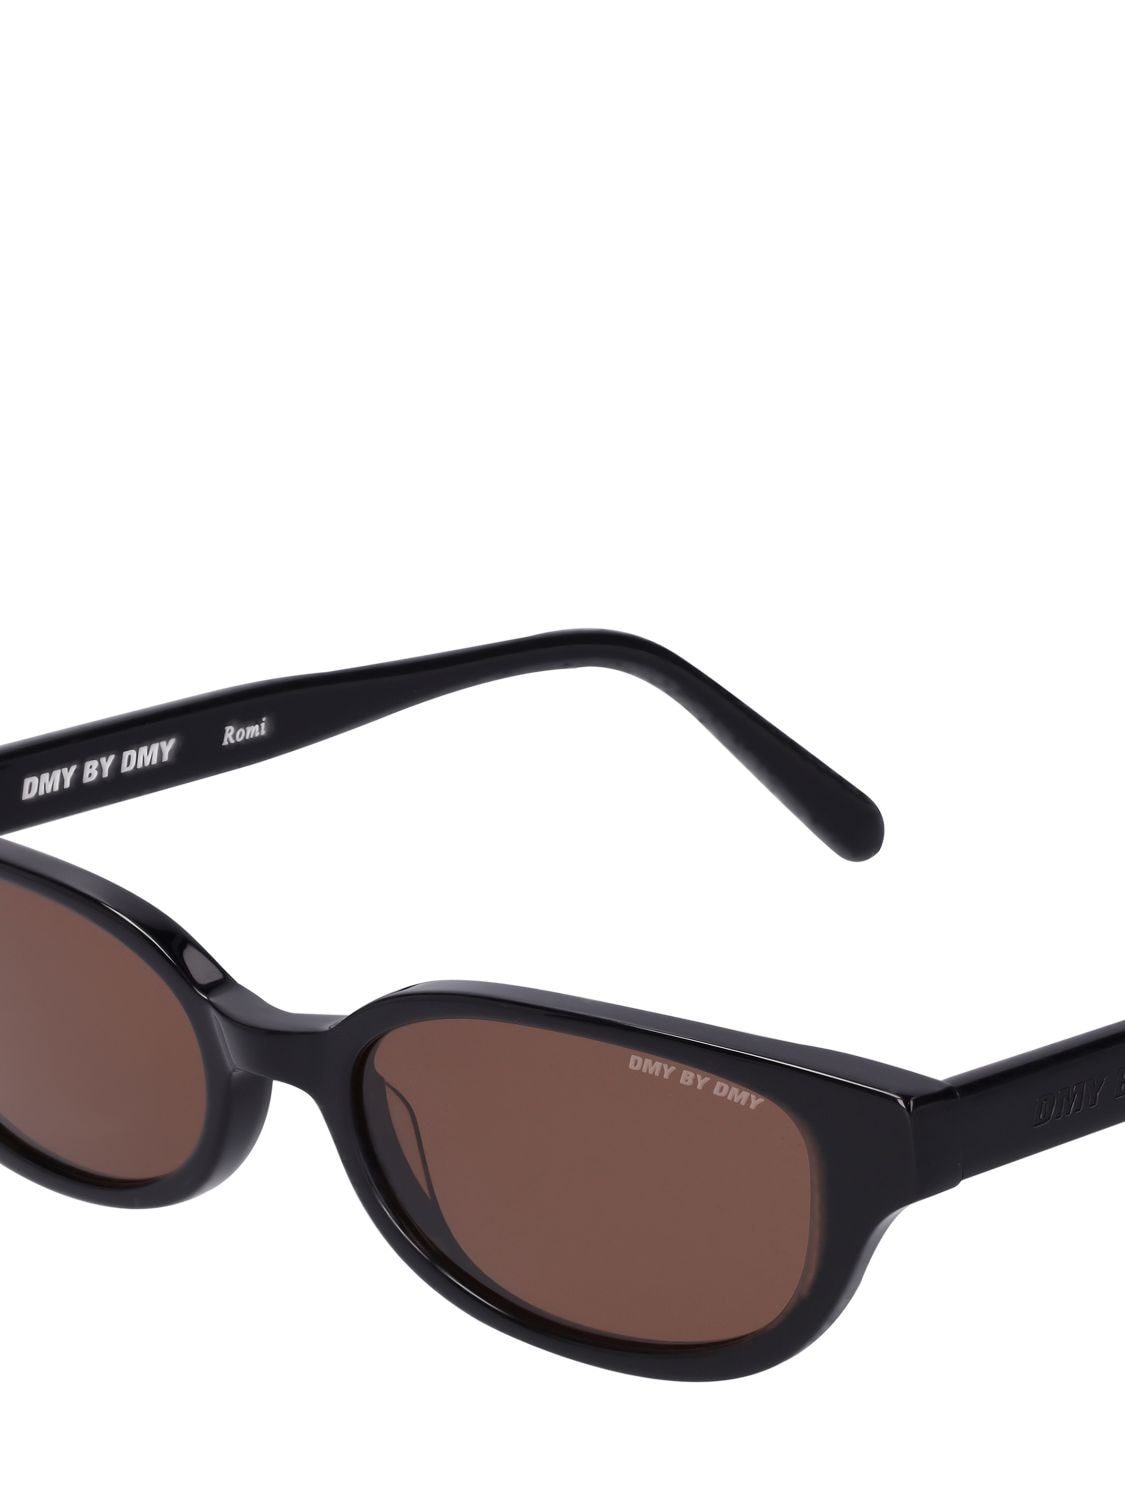 Shop Dmy By Dmy Romi Round Acetate Sunglasses In Black,brown